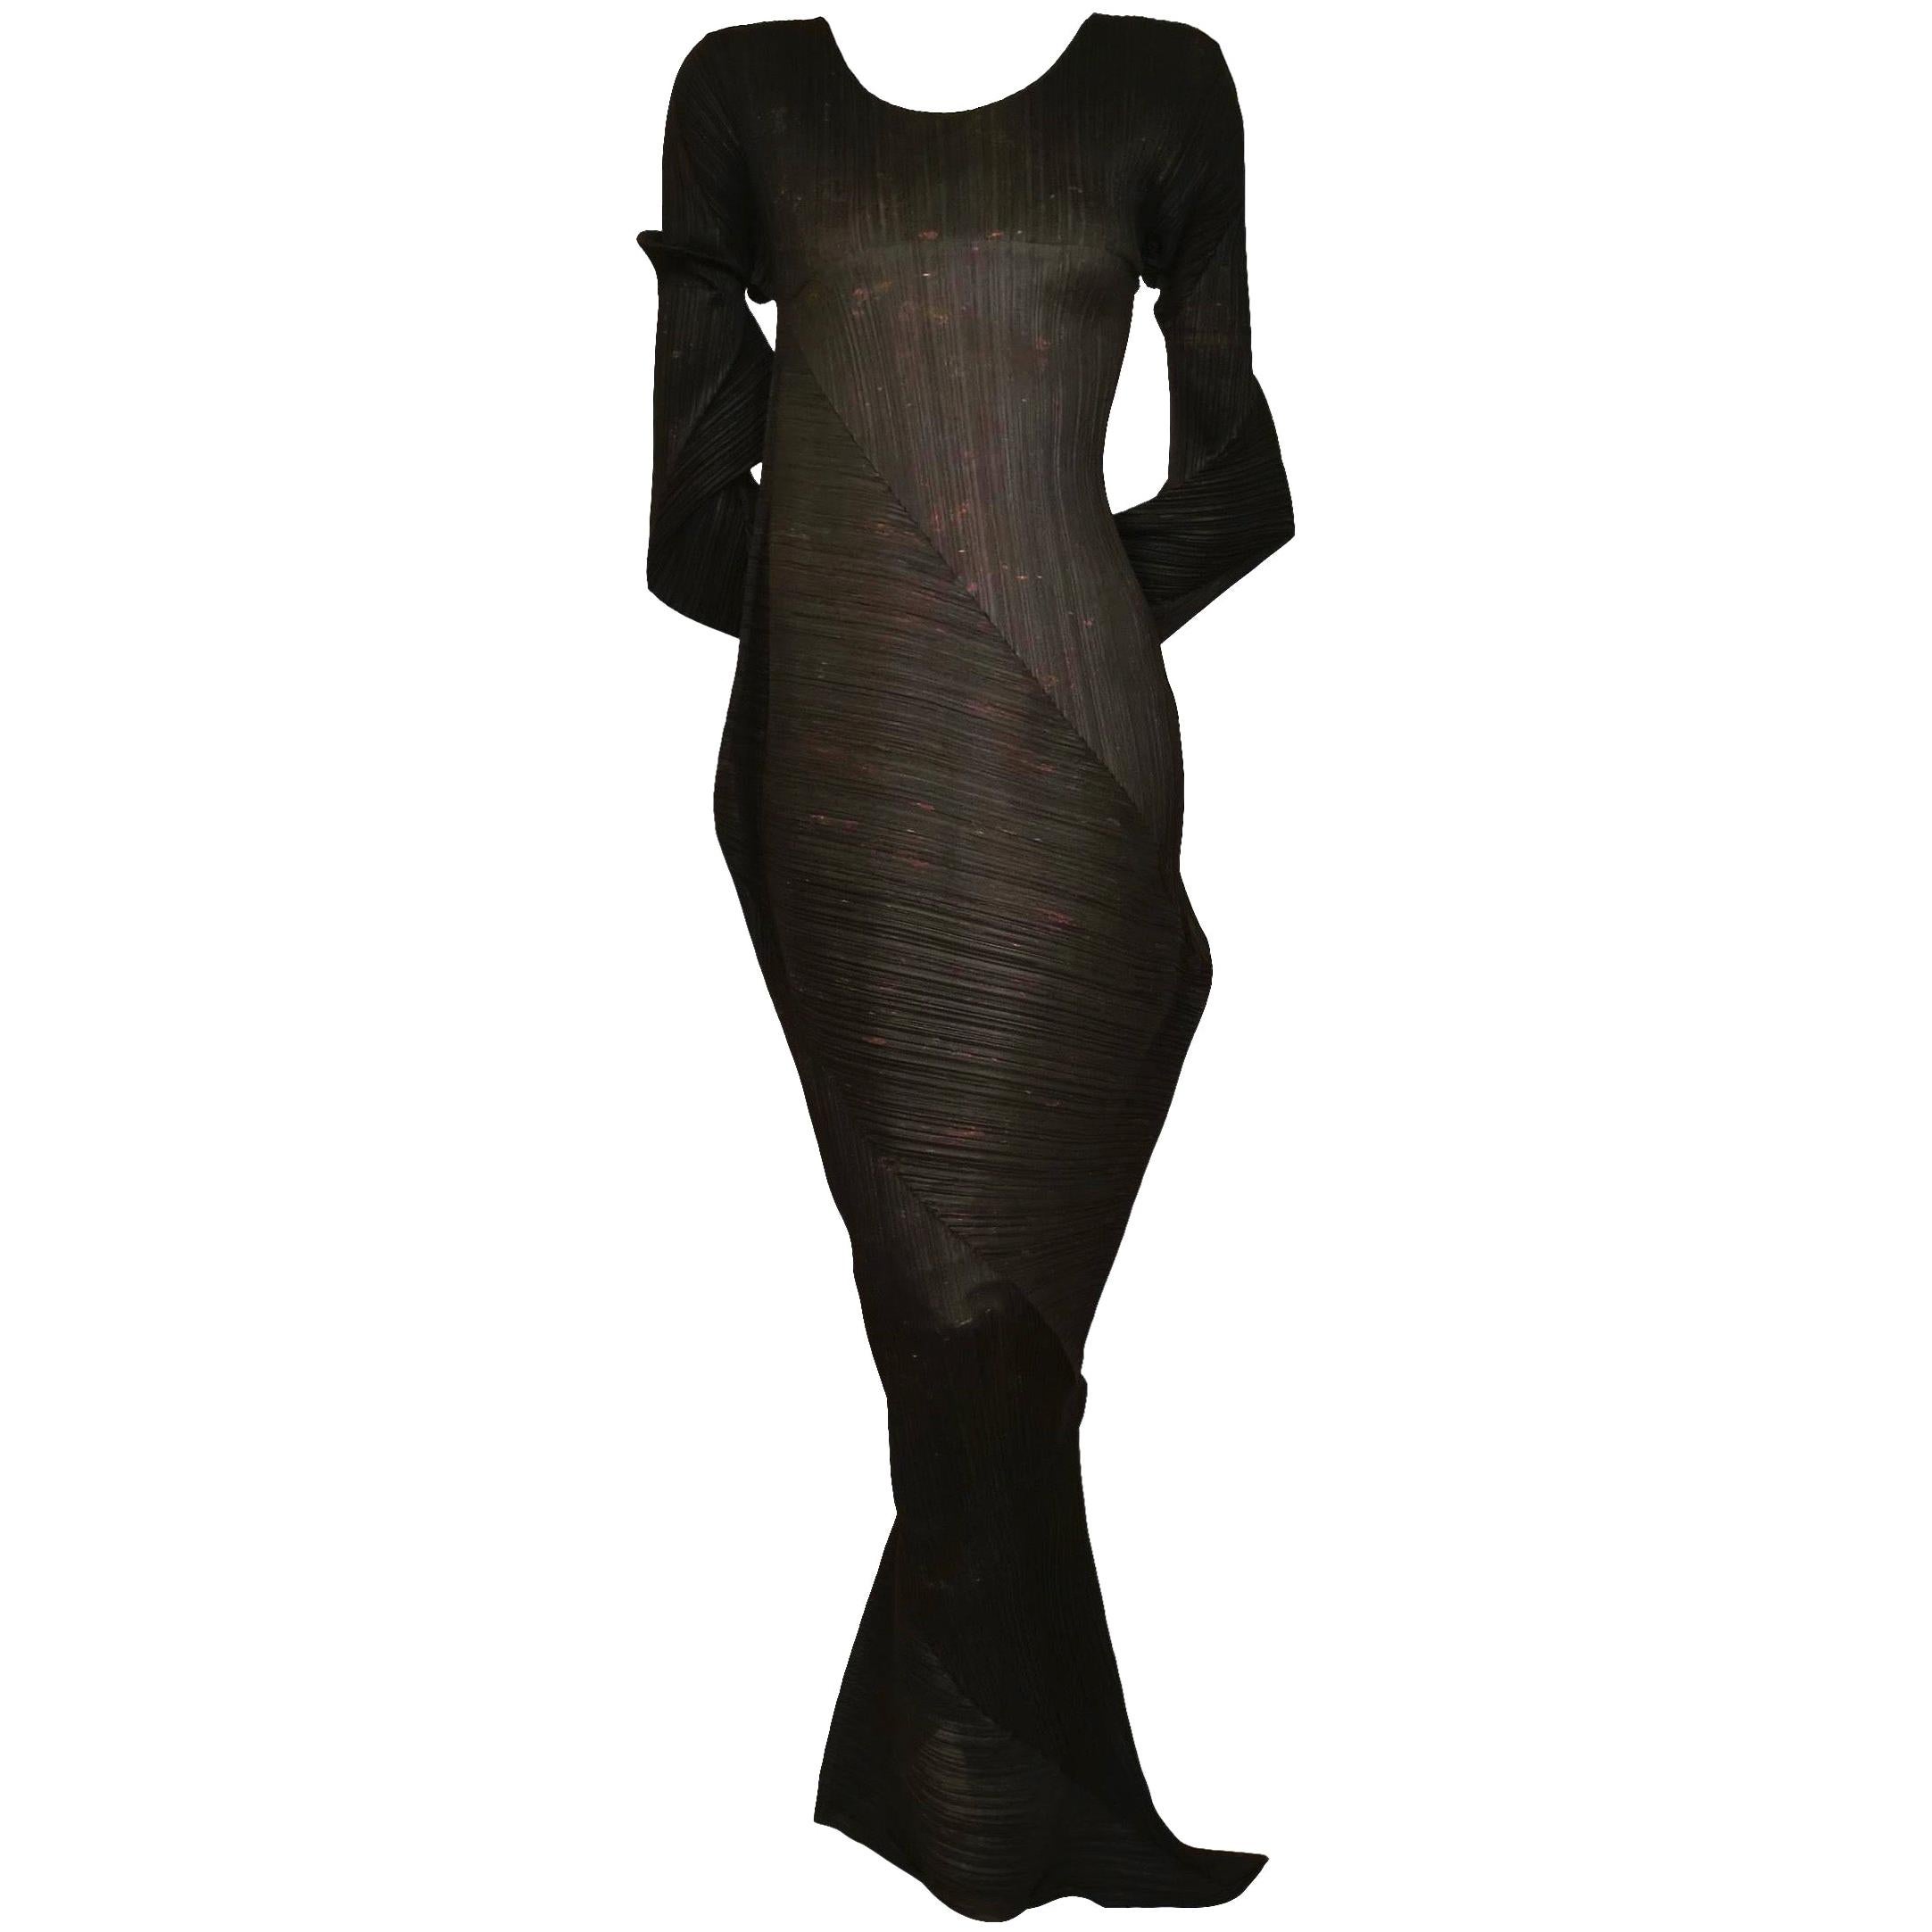 Issey Miyake Guest Artist Cai Guo Qiang Series Number 4 Serpentine Dress For Sale